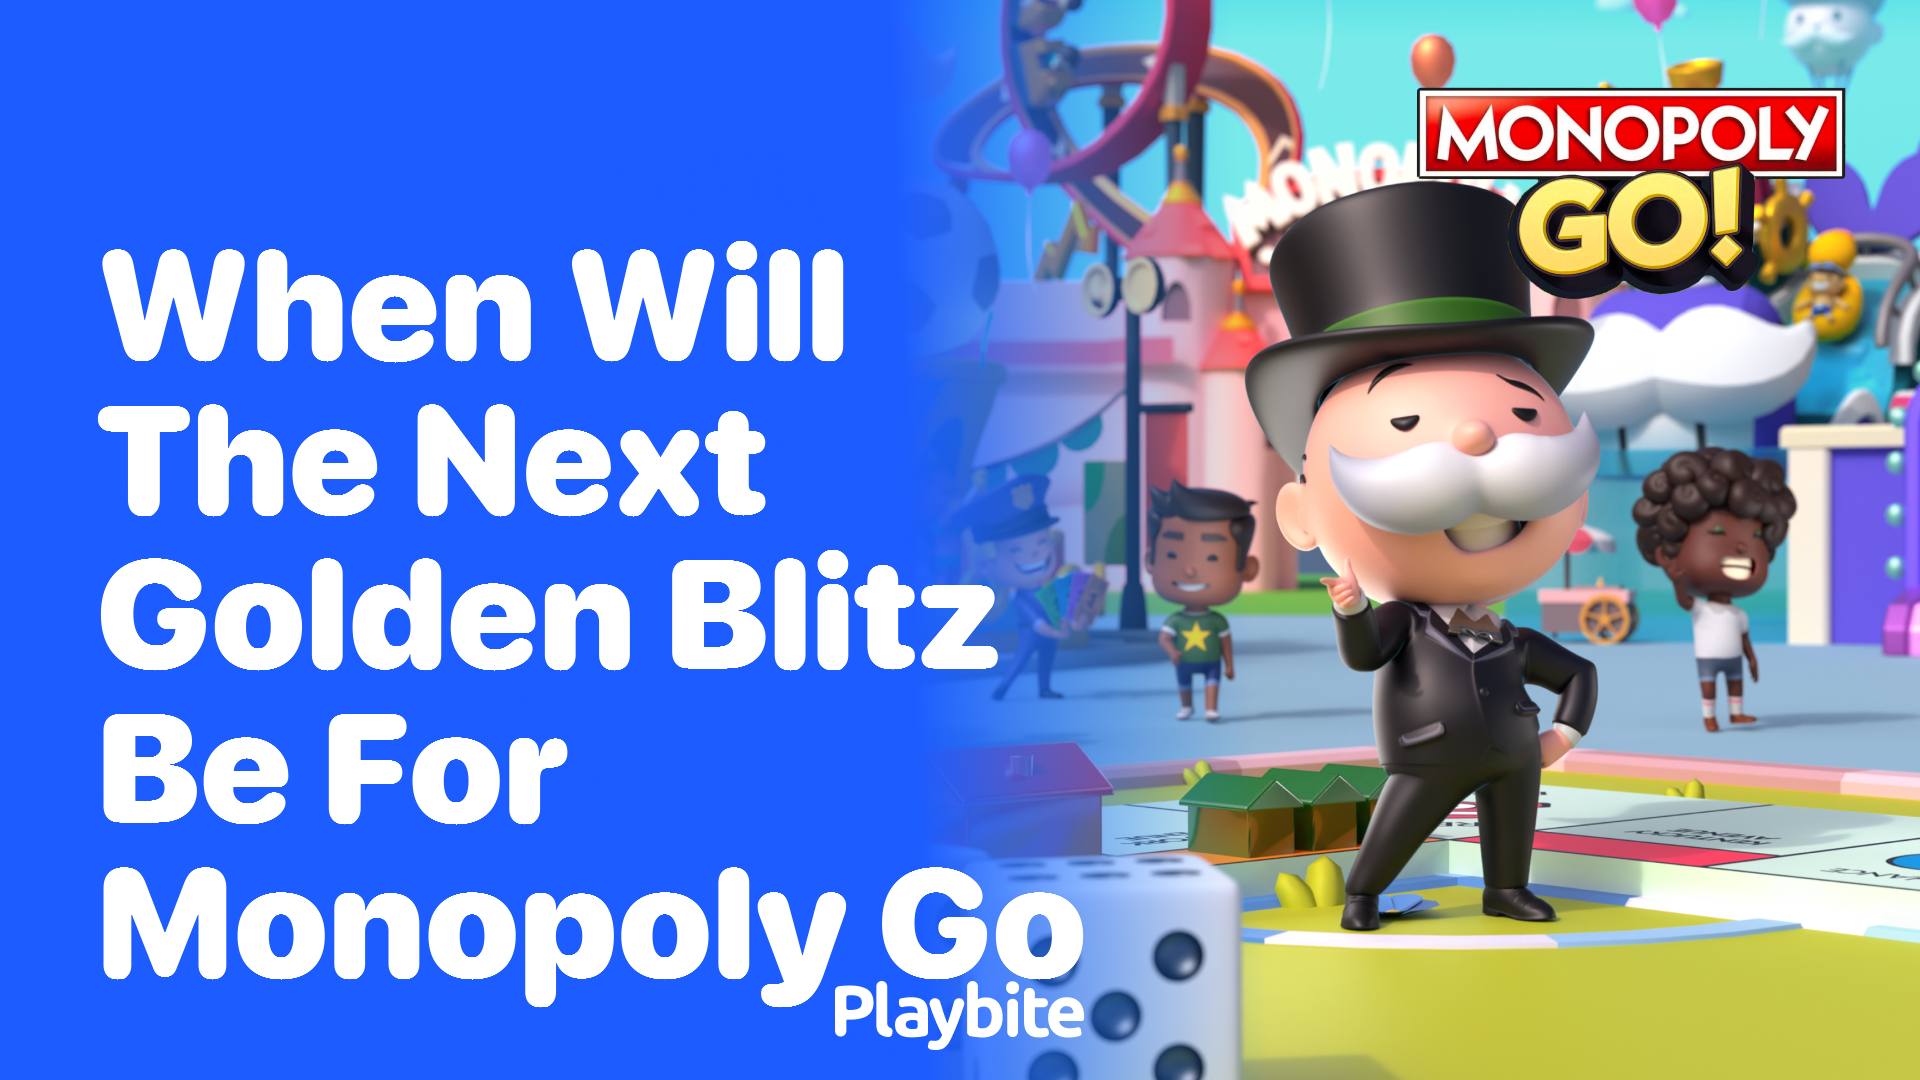 When Will the Next Golden Blitz Be for Monopoly Go?